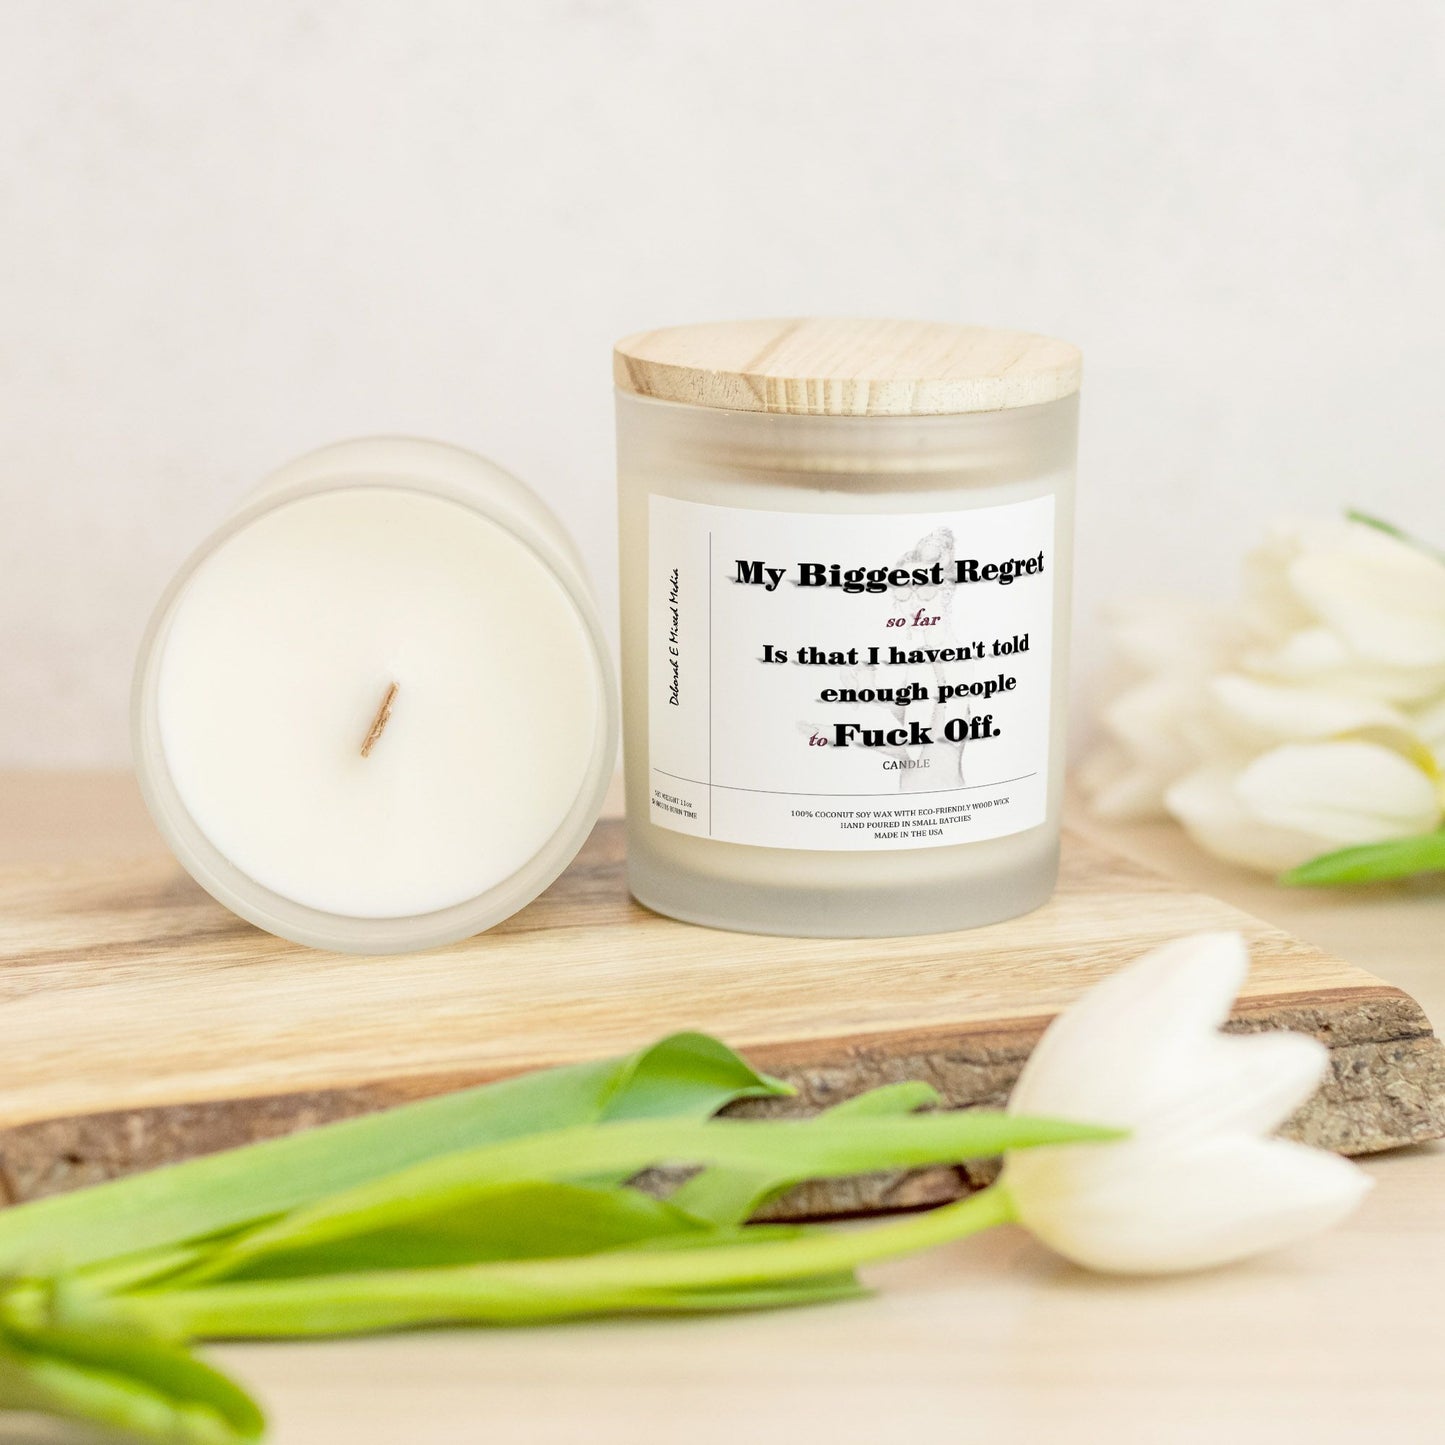 "My Biggest Regret" Frosted Glass Candle